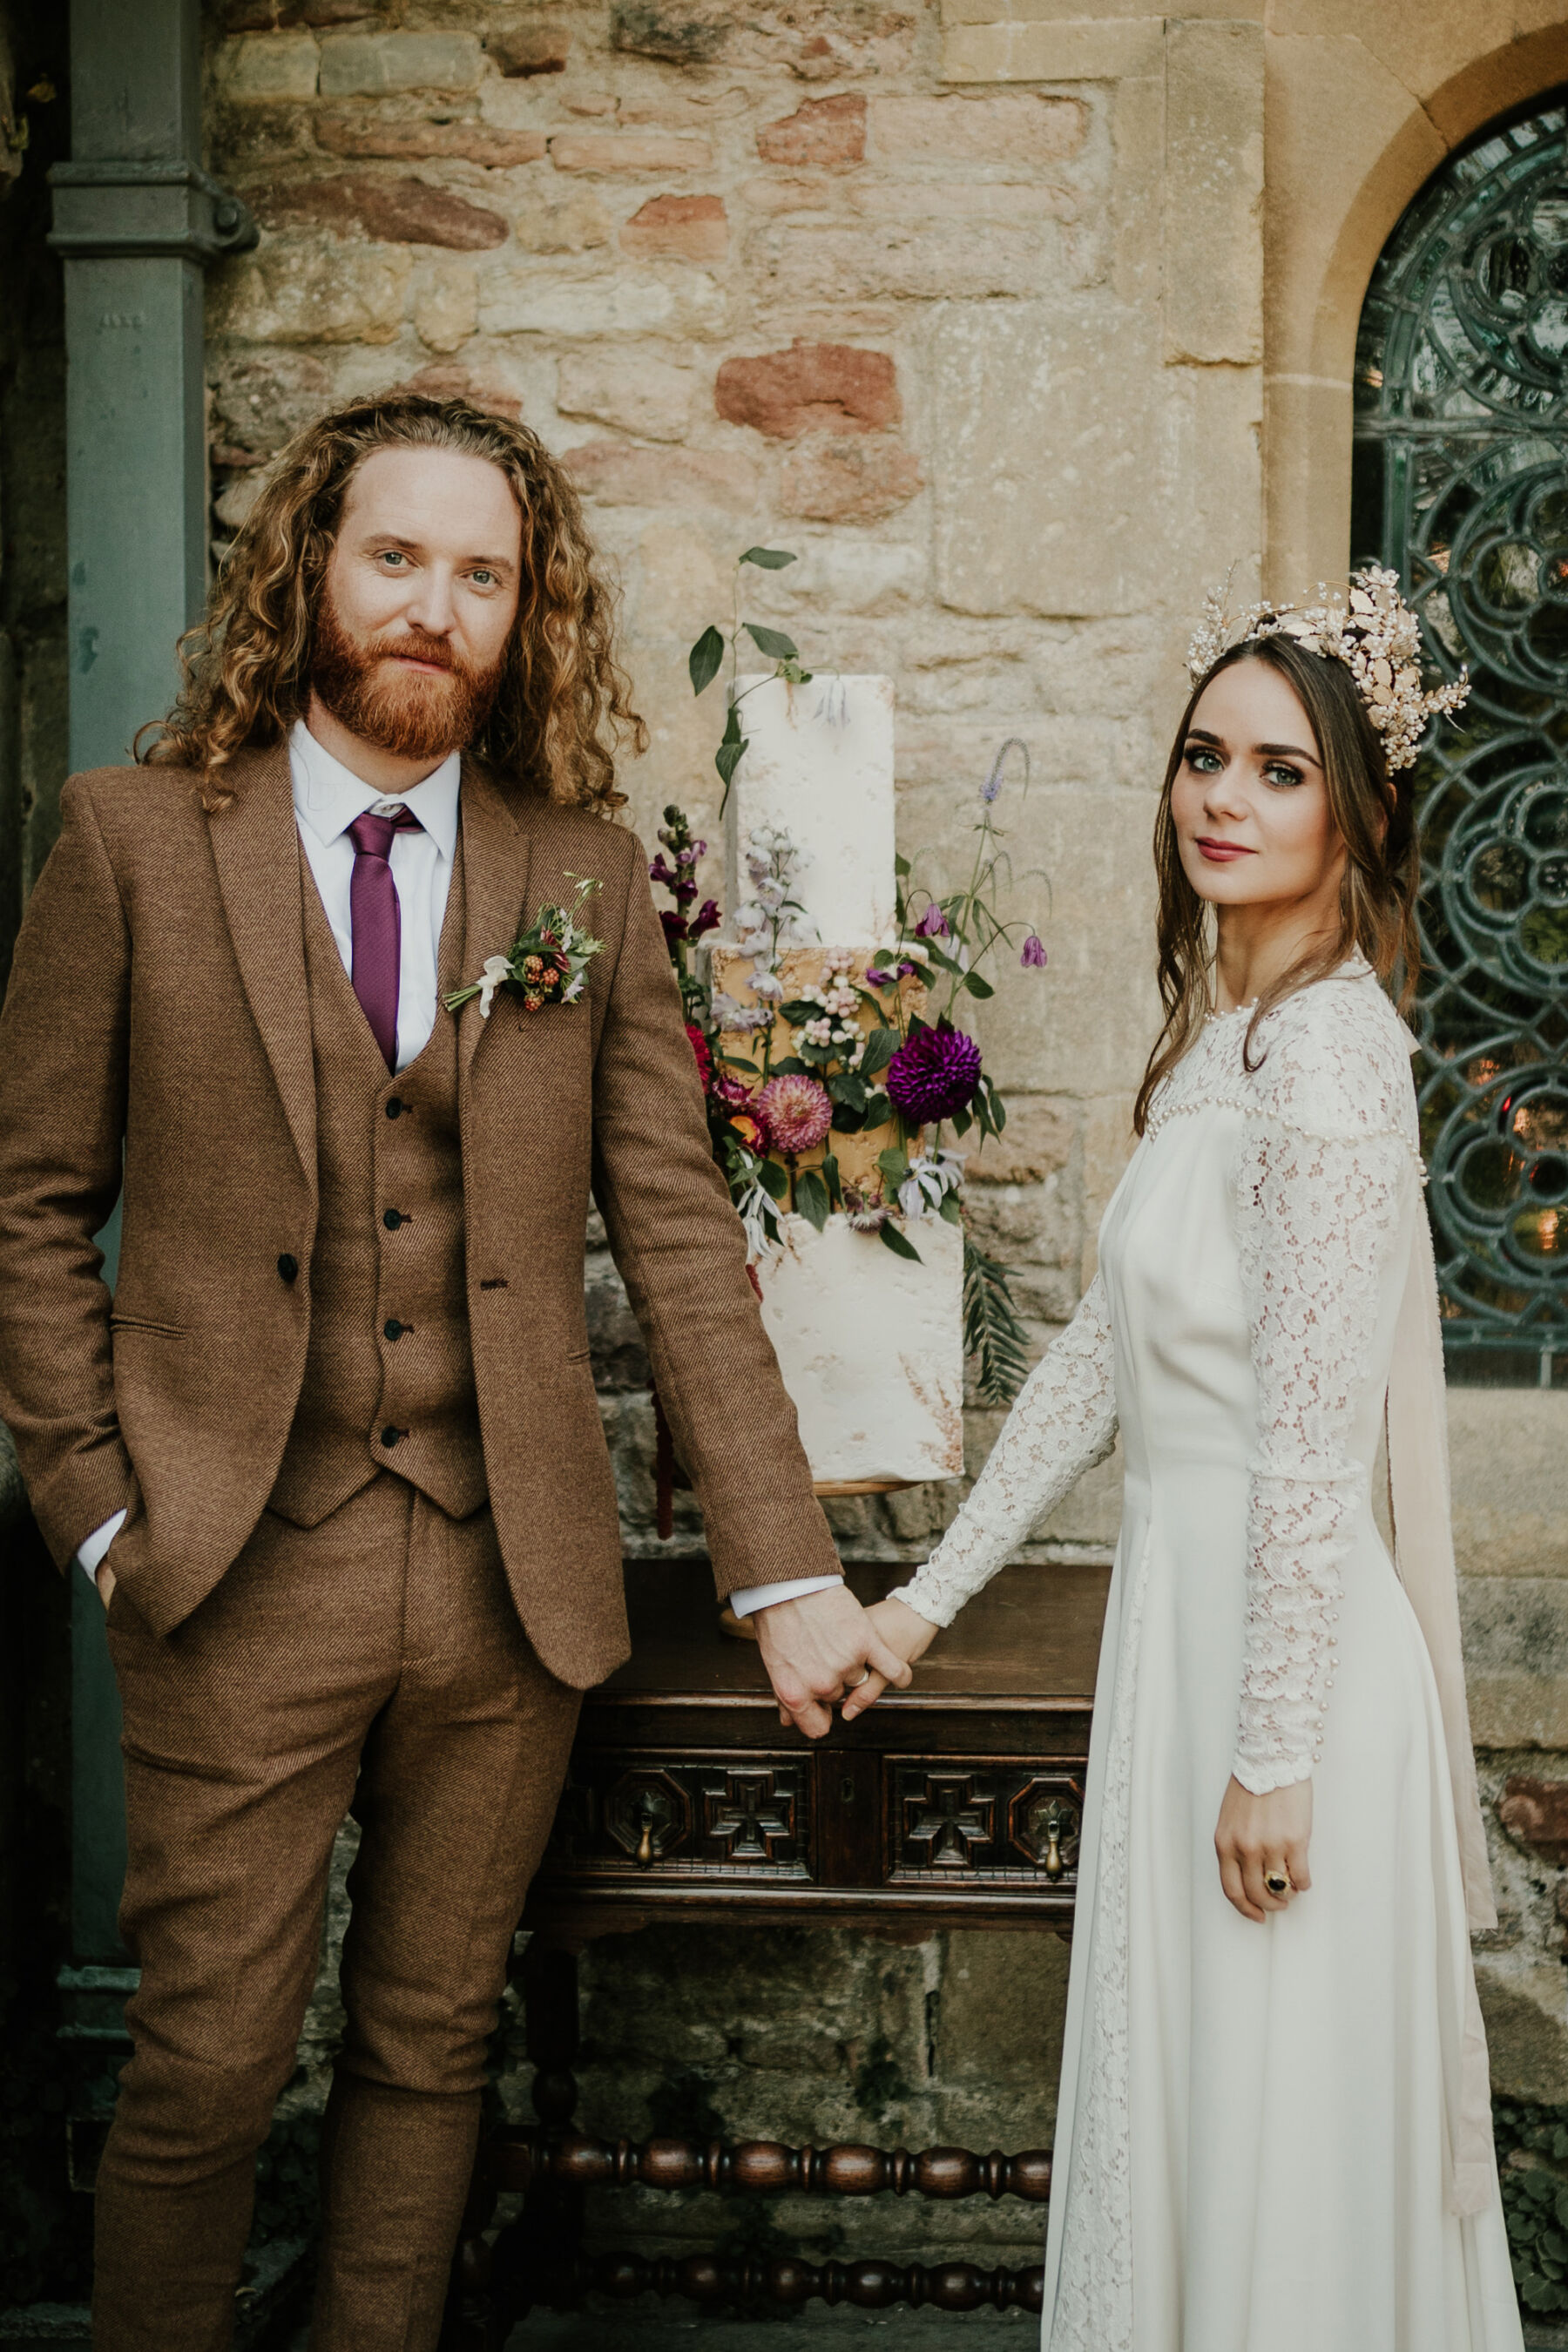 Bride wearing a vintage lace wedding dress and a bridal crown. Groom in a brown suit. Gardens at Bishop's Palace historic wedding venue in Wells, Somerset.